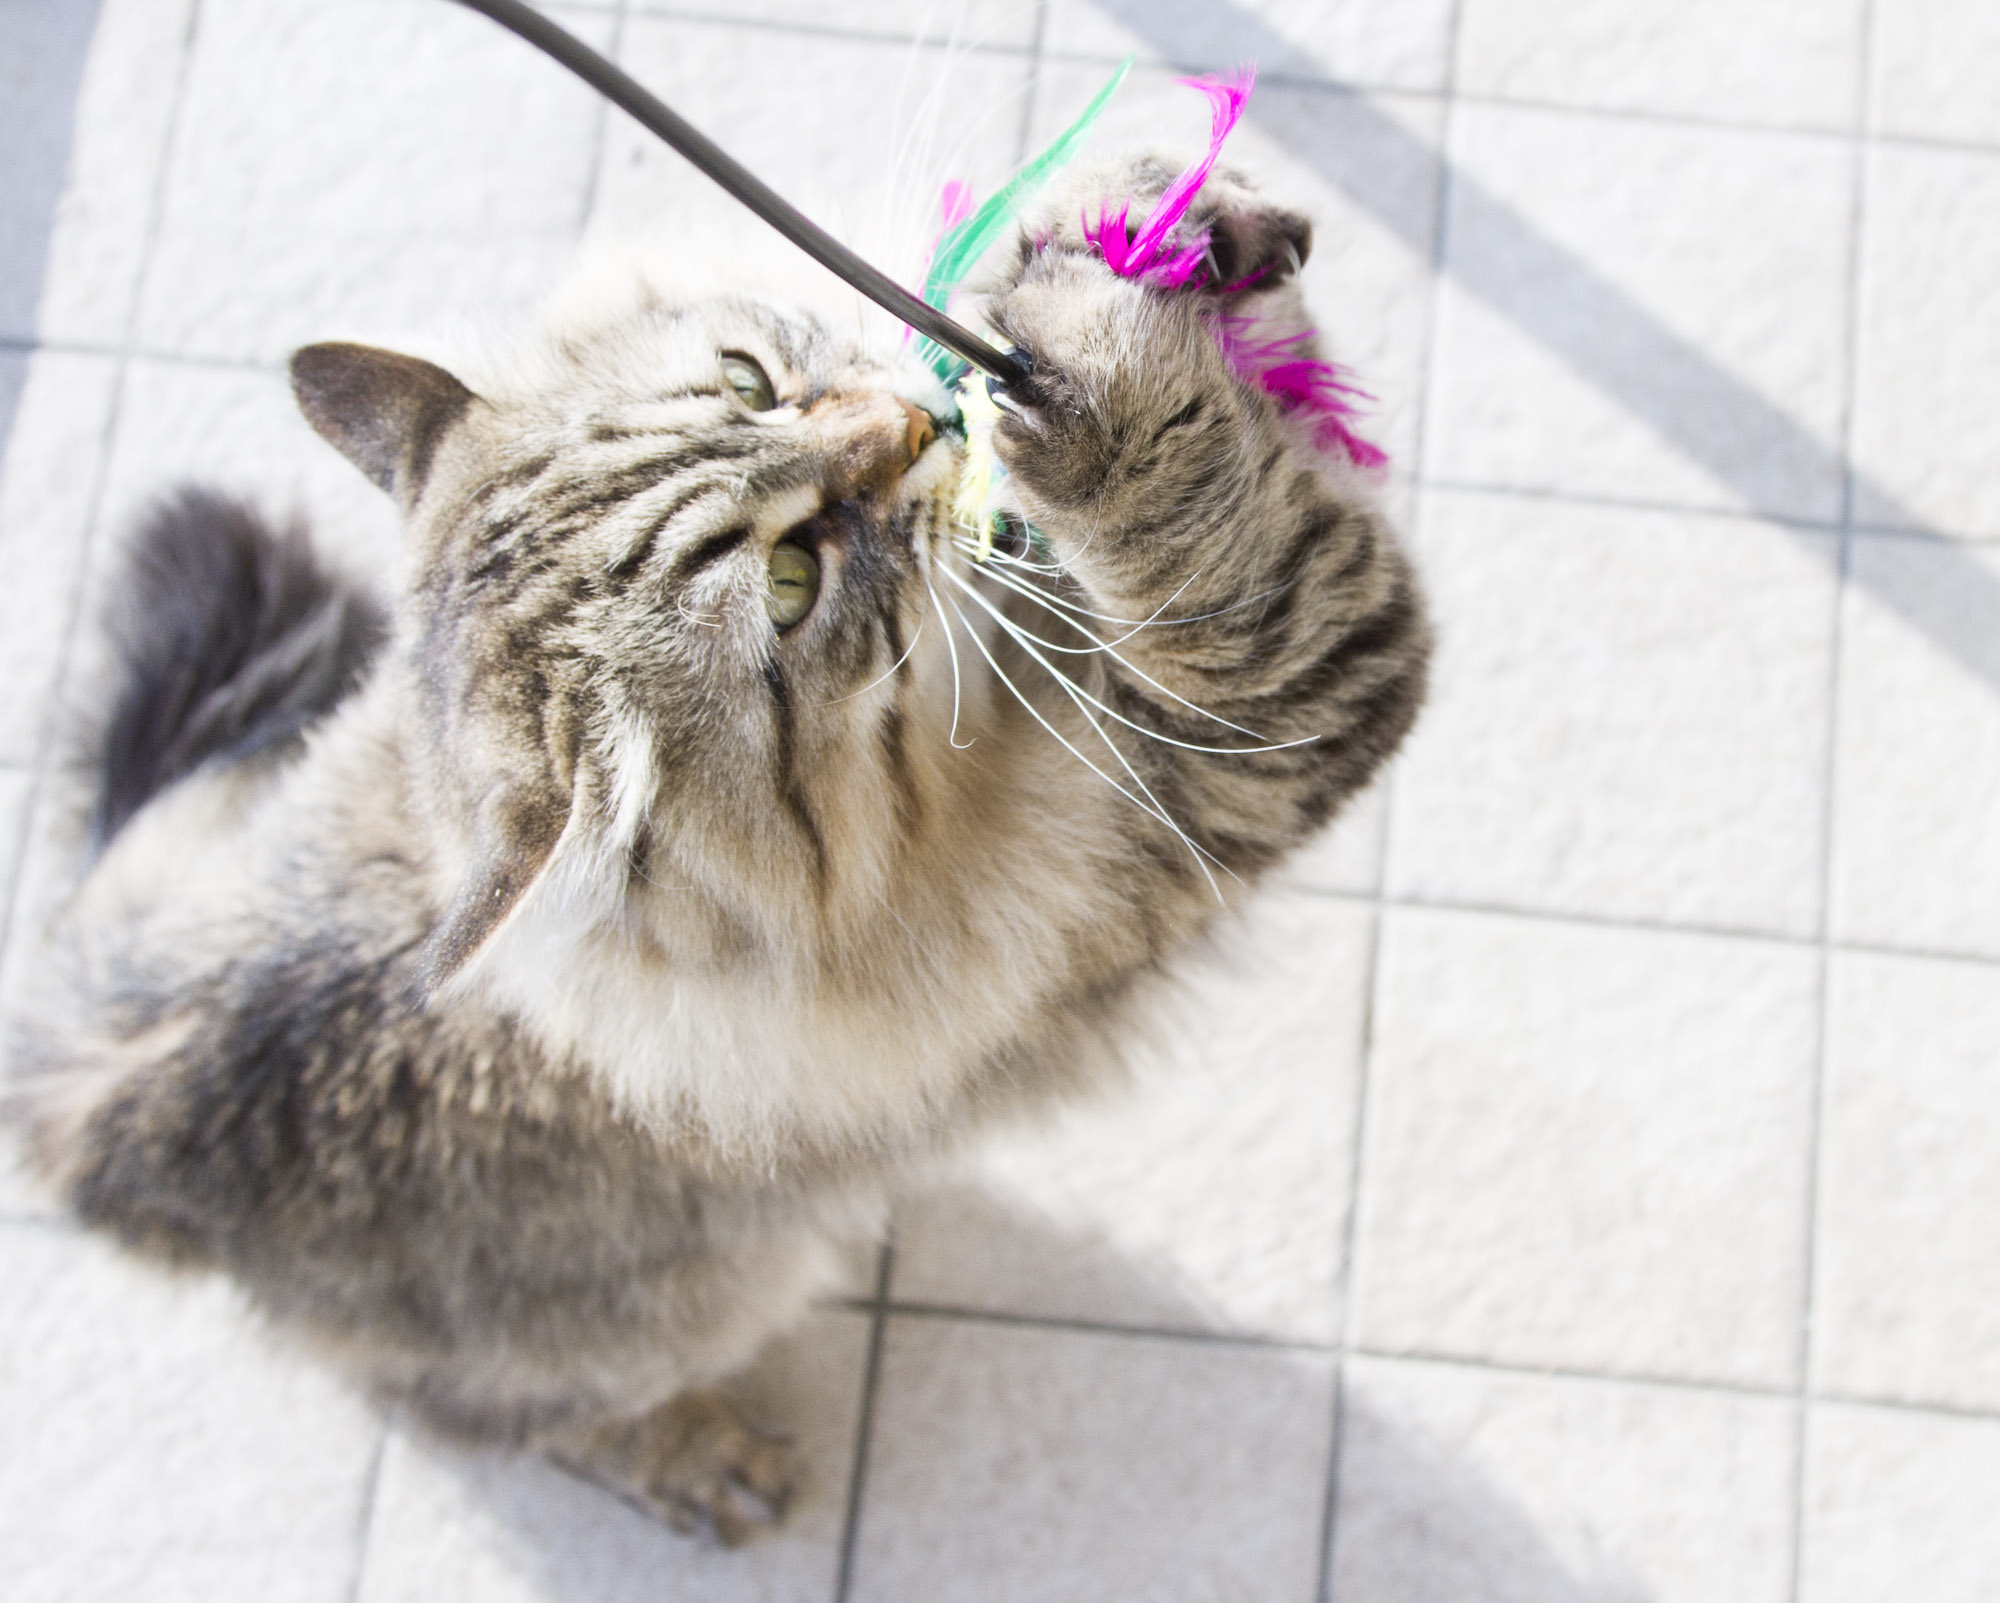 cat playing with feather wand toy